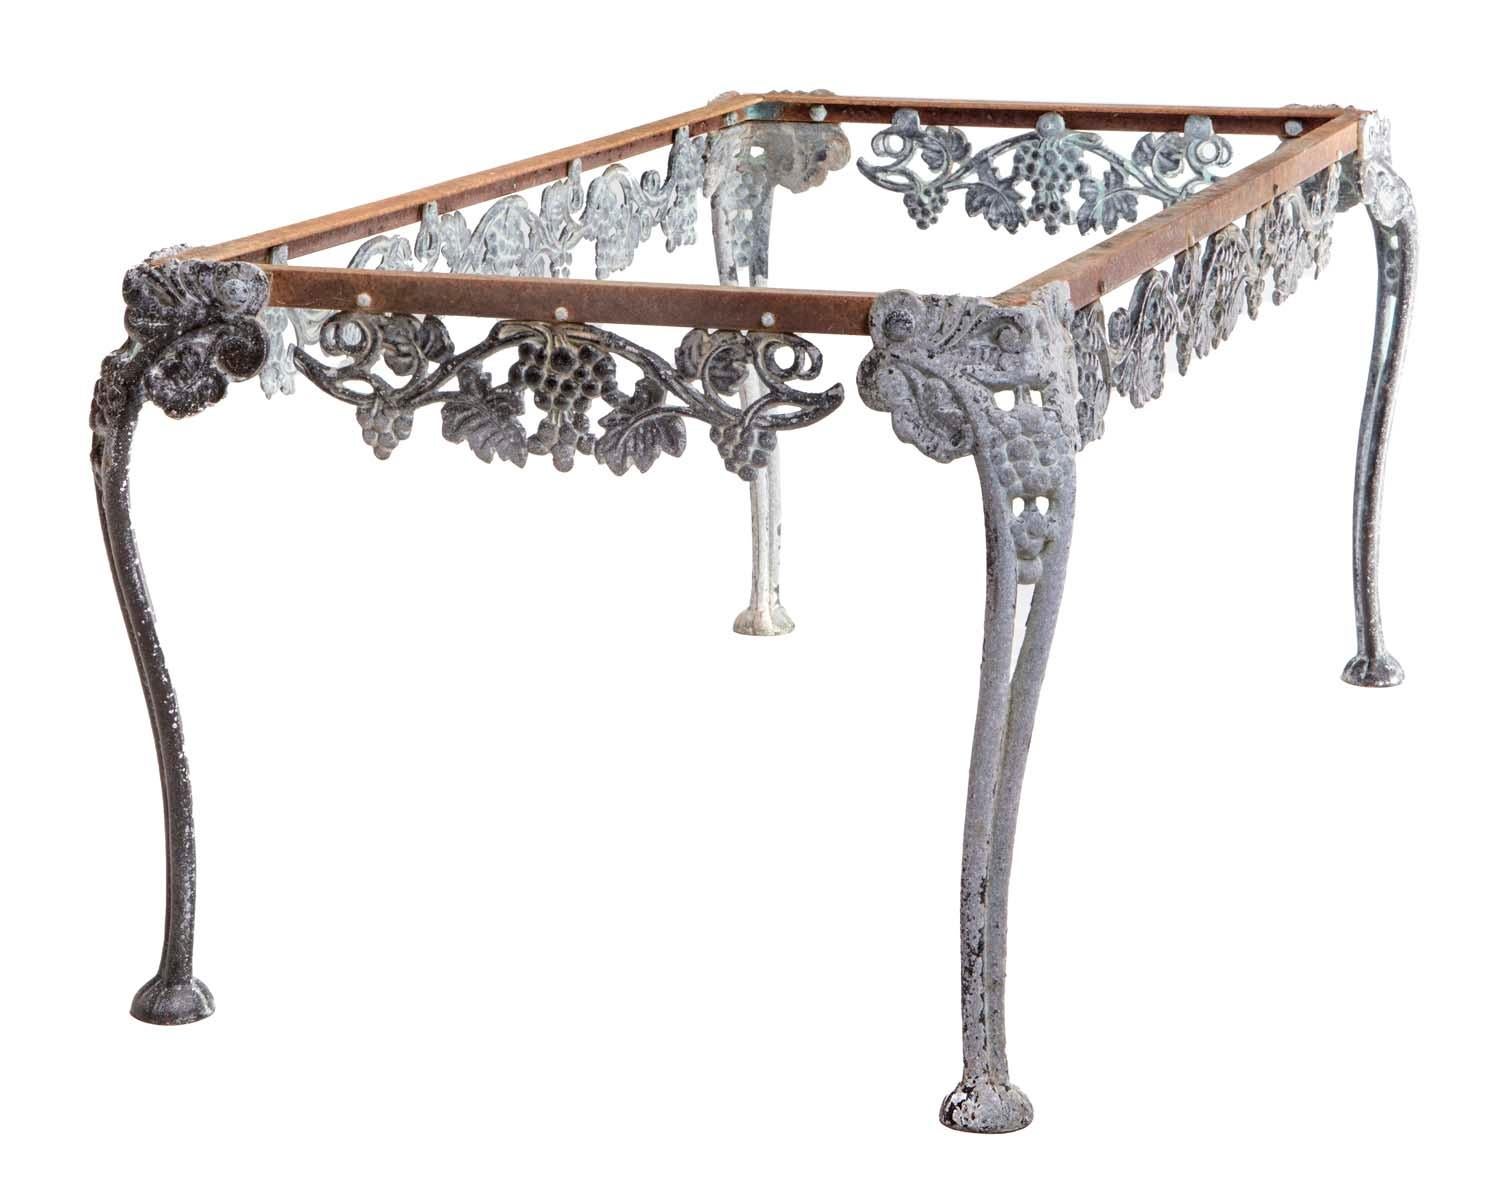 Grape Leaf Iron Table John B. Salterini (Italy, 1928–52)

While John B. Salterini (1928–52) designed ornate wrought-iron garden furniture for patios and lawns, he specifically sought to match the forms of indoor furniture and also advocated the